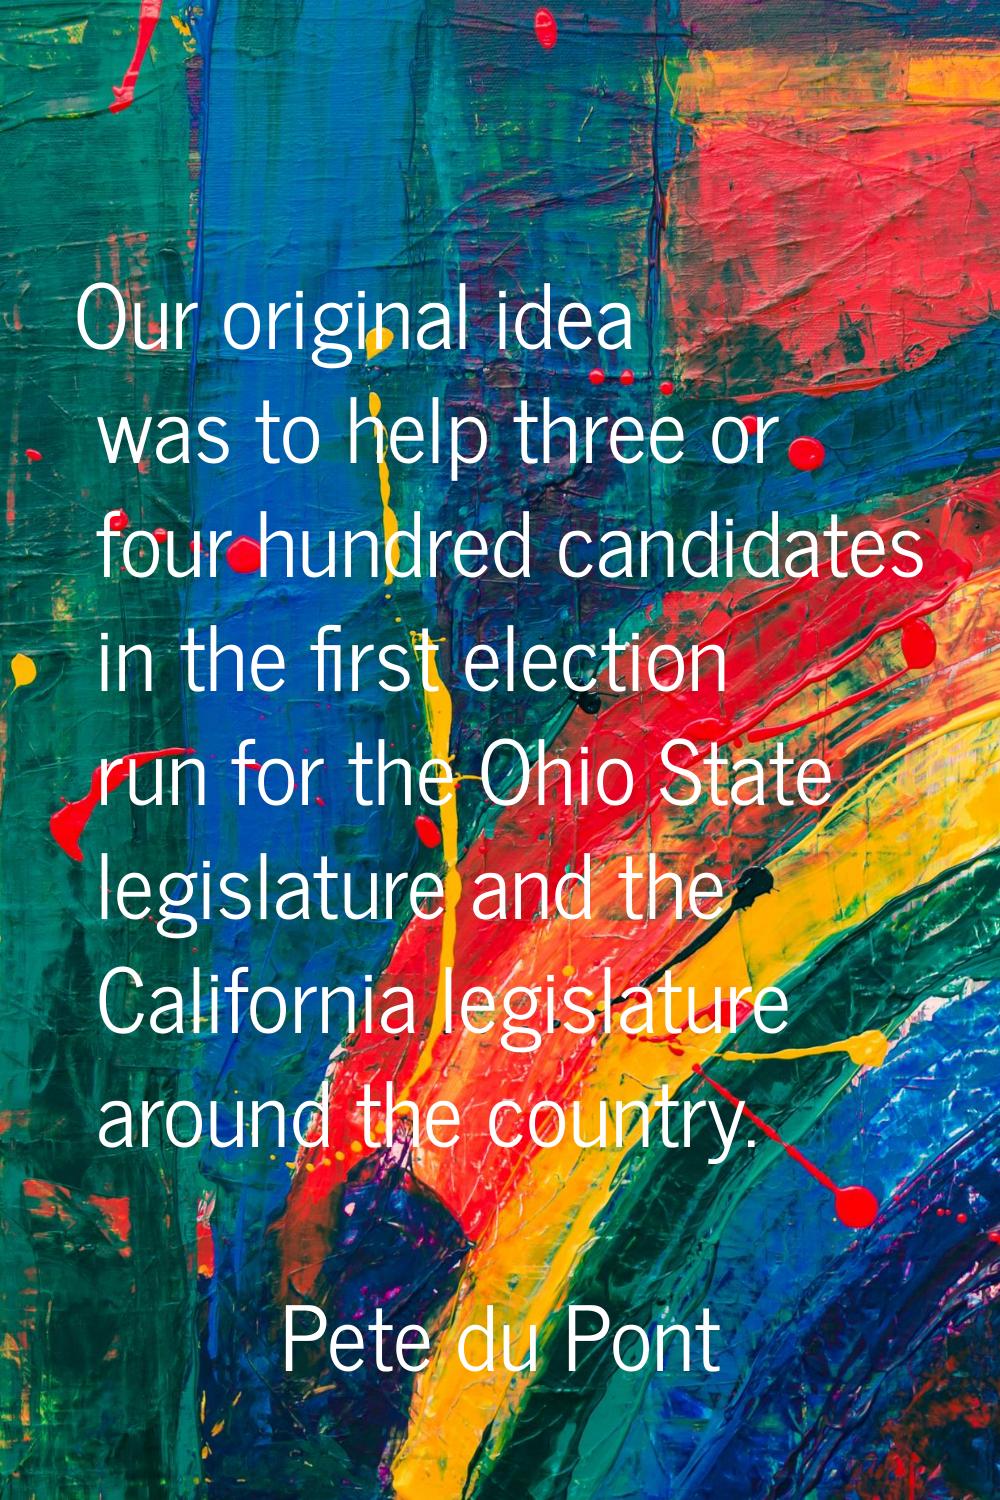 Our original idea was to help three or four hundred candidates in the first election run for the Oh